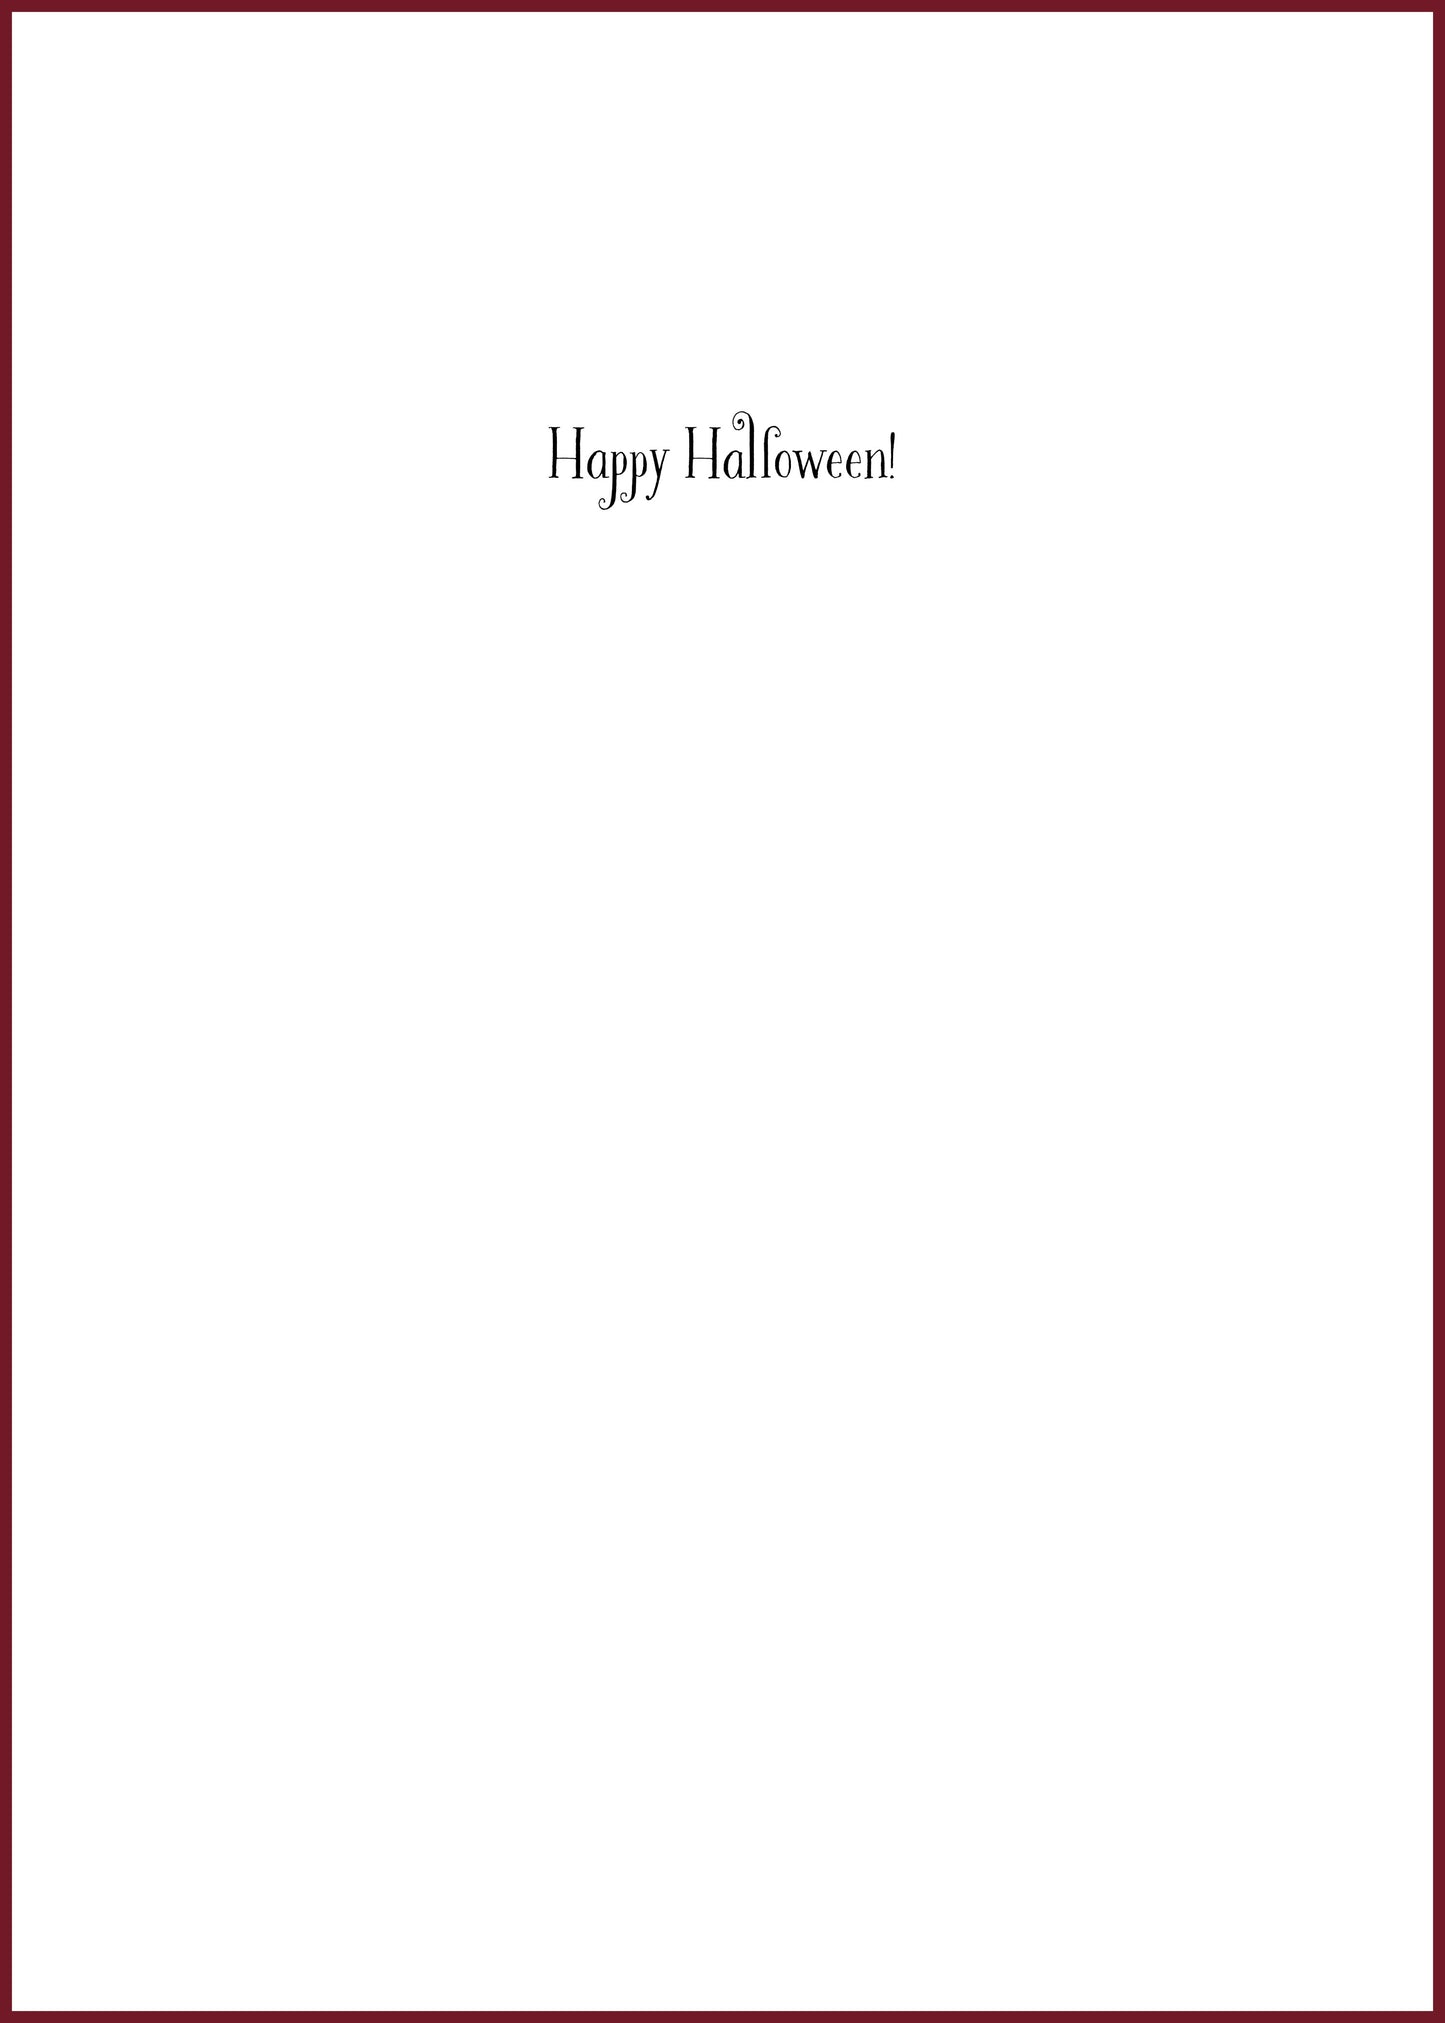 "I Can Drive a Stick" Greeting Card (Halloween)